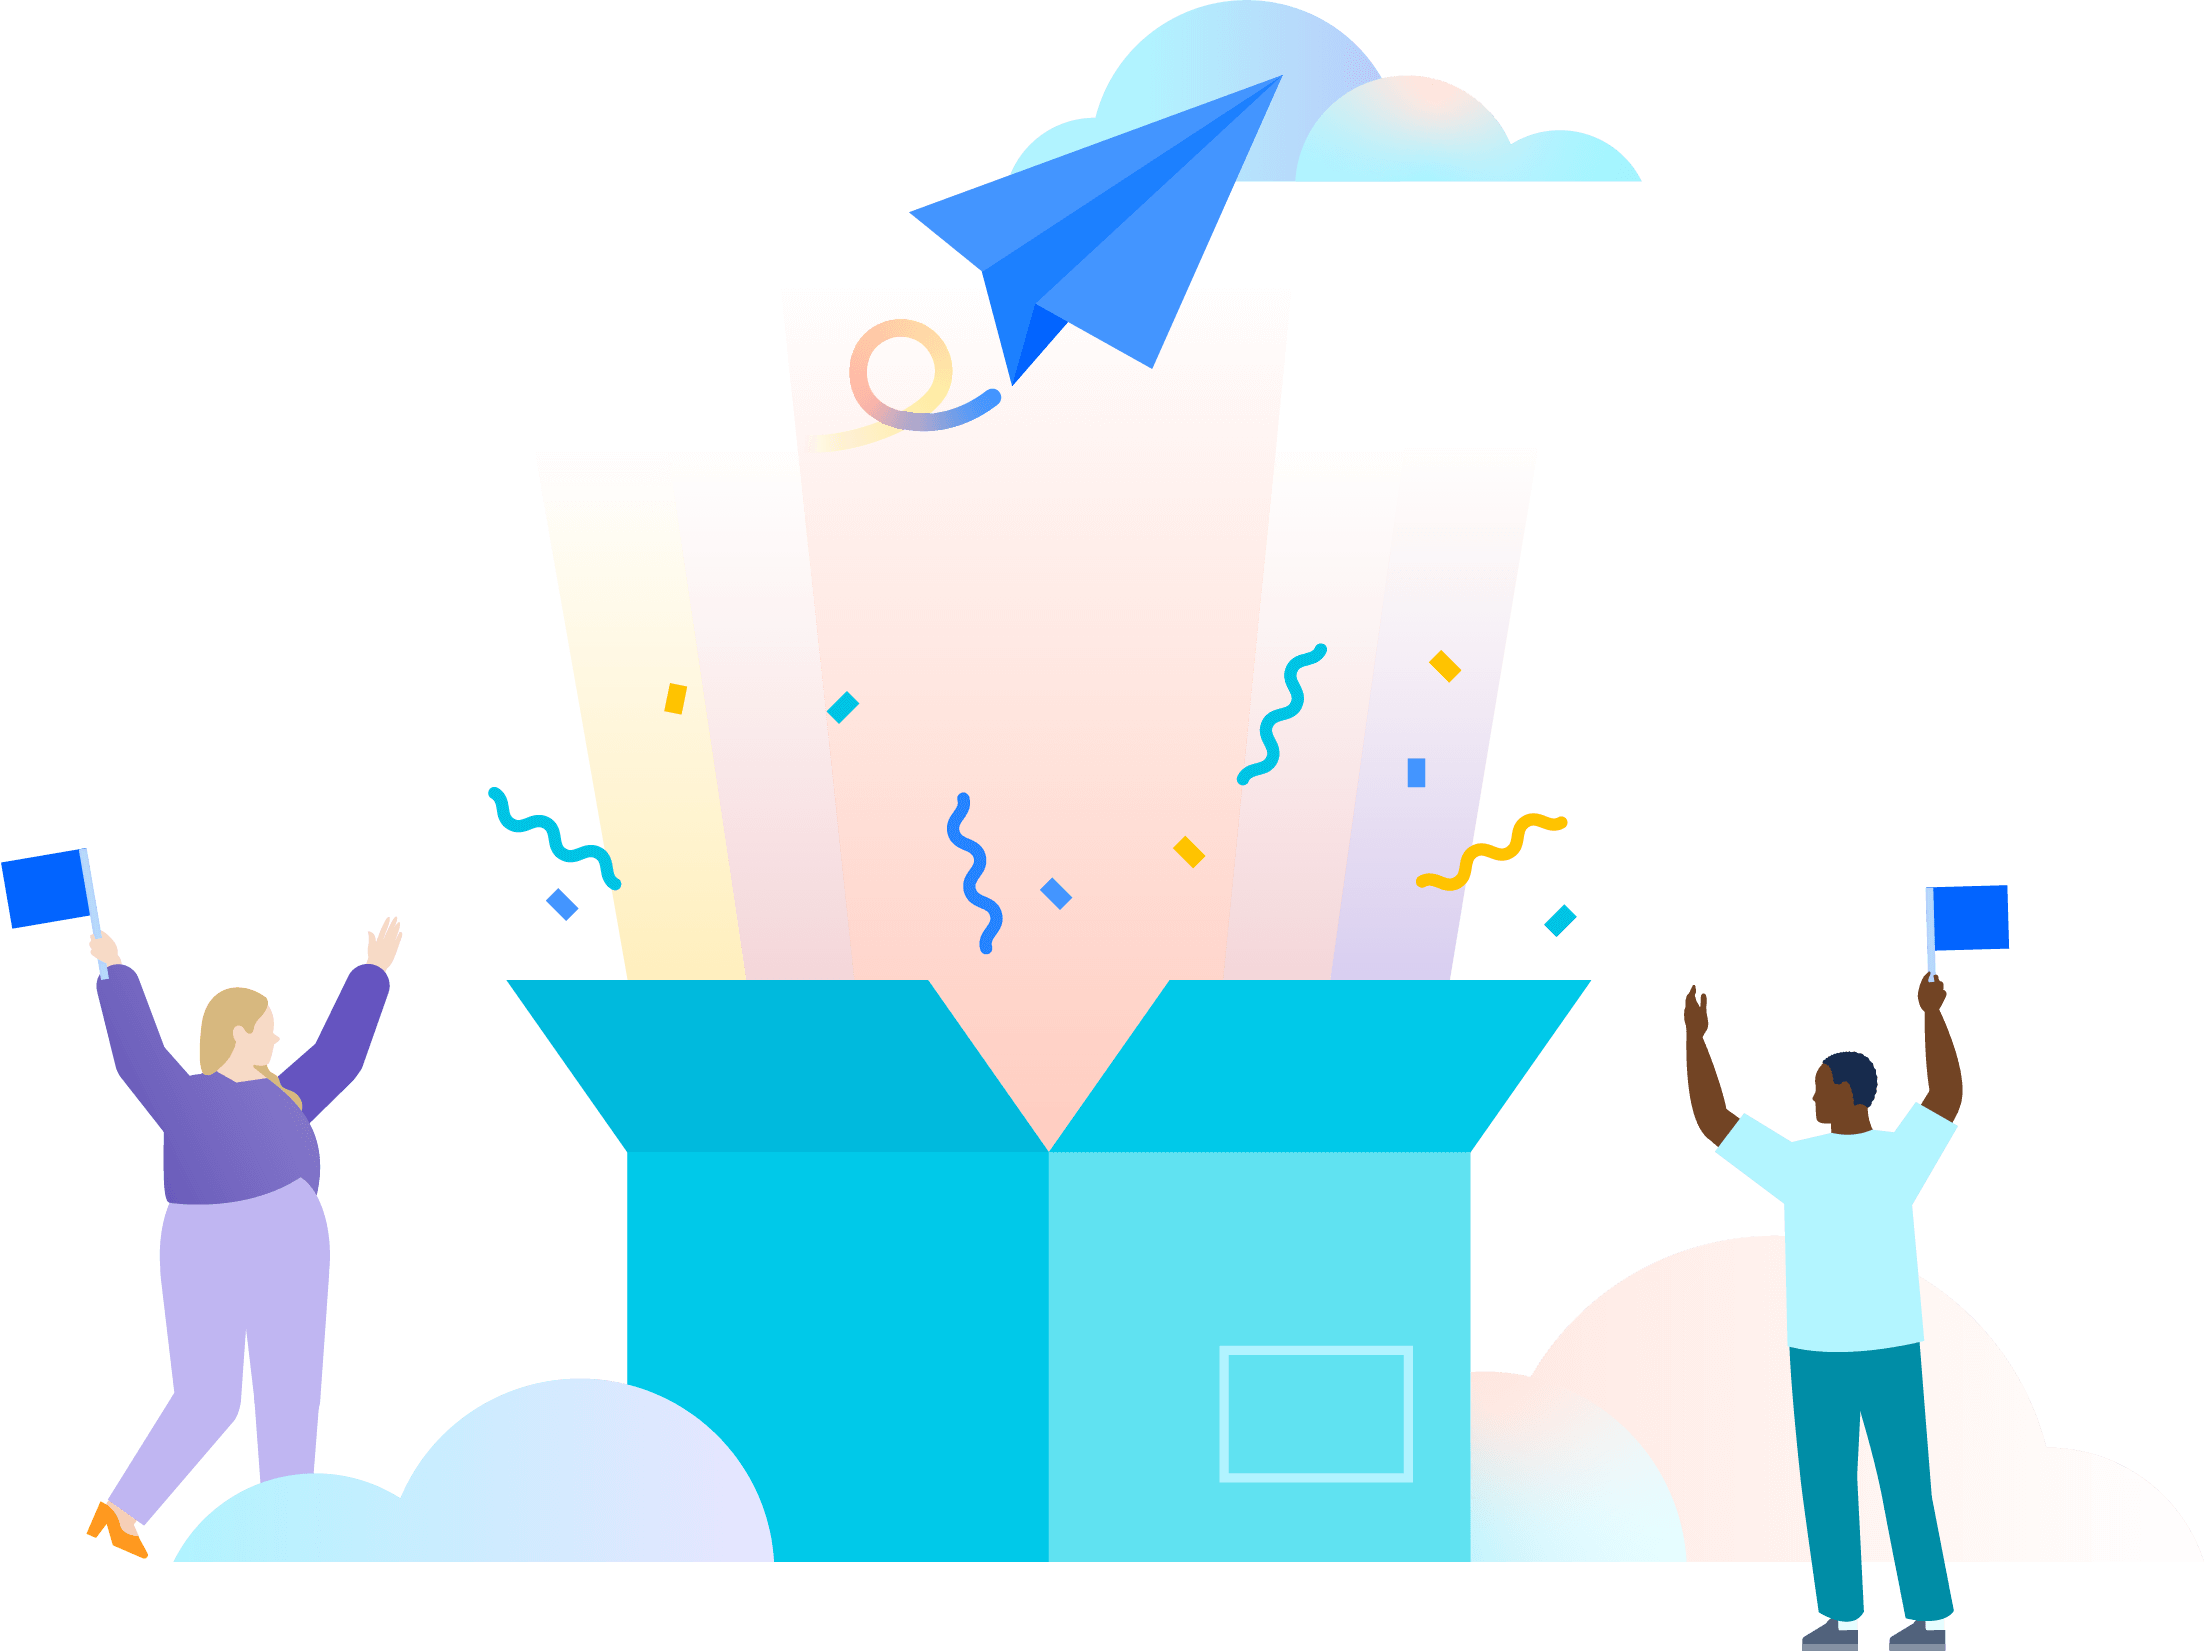 An illustration of two people celebrating the opening of a large oversized teal box which is revealing multi-colored light rays, confetti and a blue paper airplane headed up towards clouds.